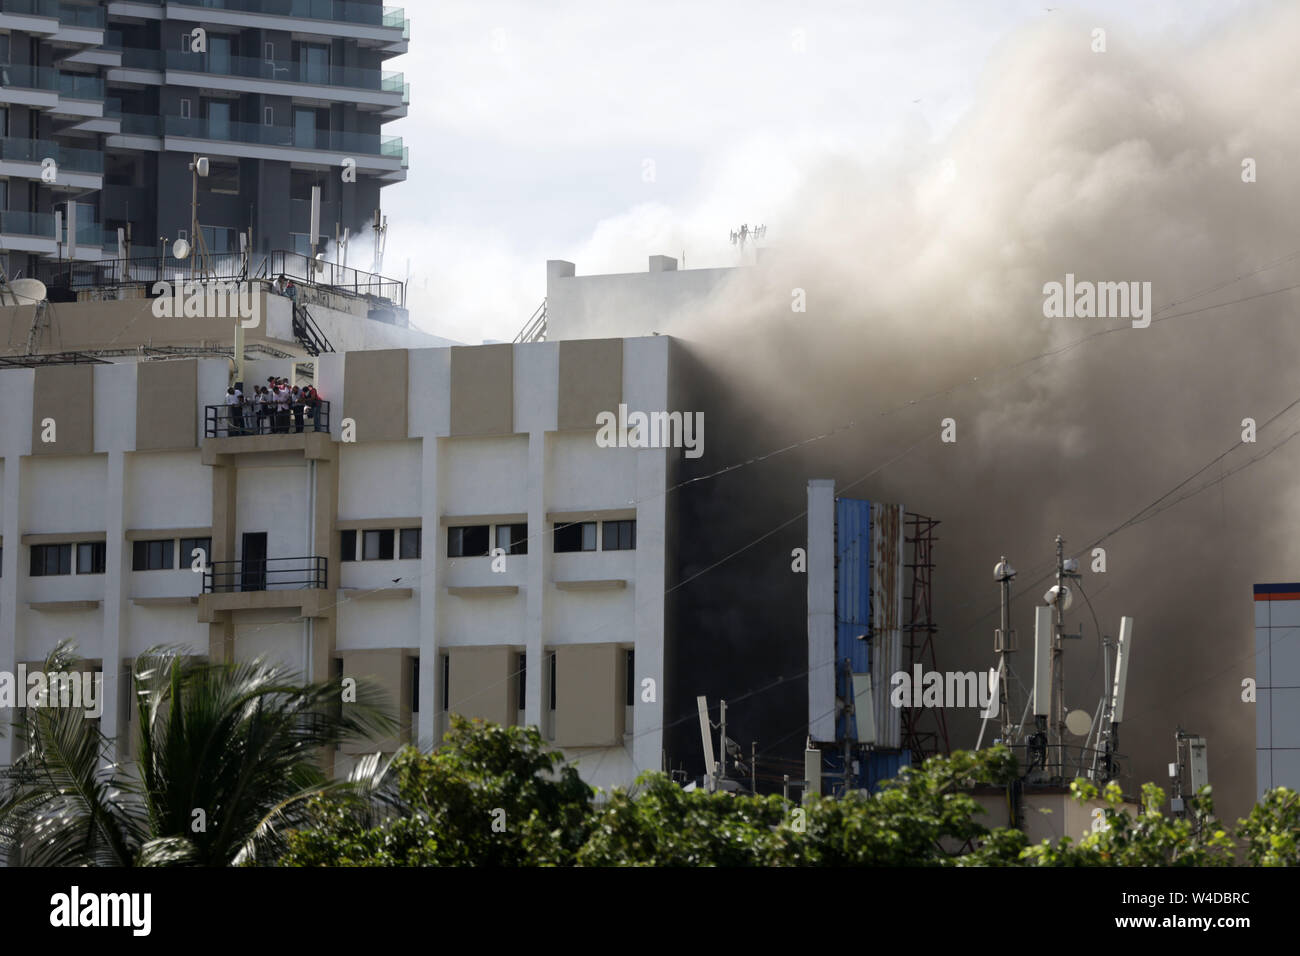 Mumbai, India. 22nd July, 2019. People wait for rescue on the balcony of Mahanagar Telephone Nigam Limited (MTNL) building after a fire broke out in Mumbai, India, July 22, 2019. (Str/Xinhua) Credit: Xinhua/Alamy Live News Stock Photo